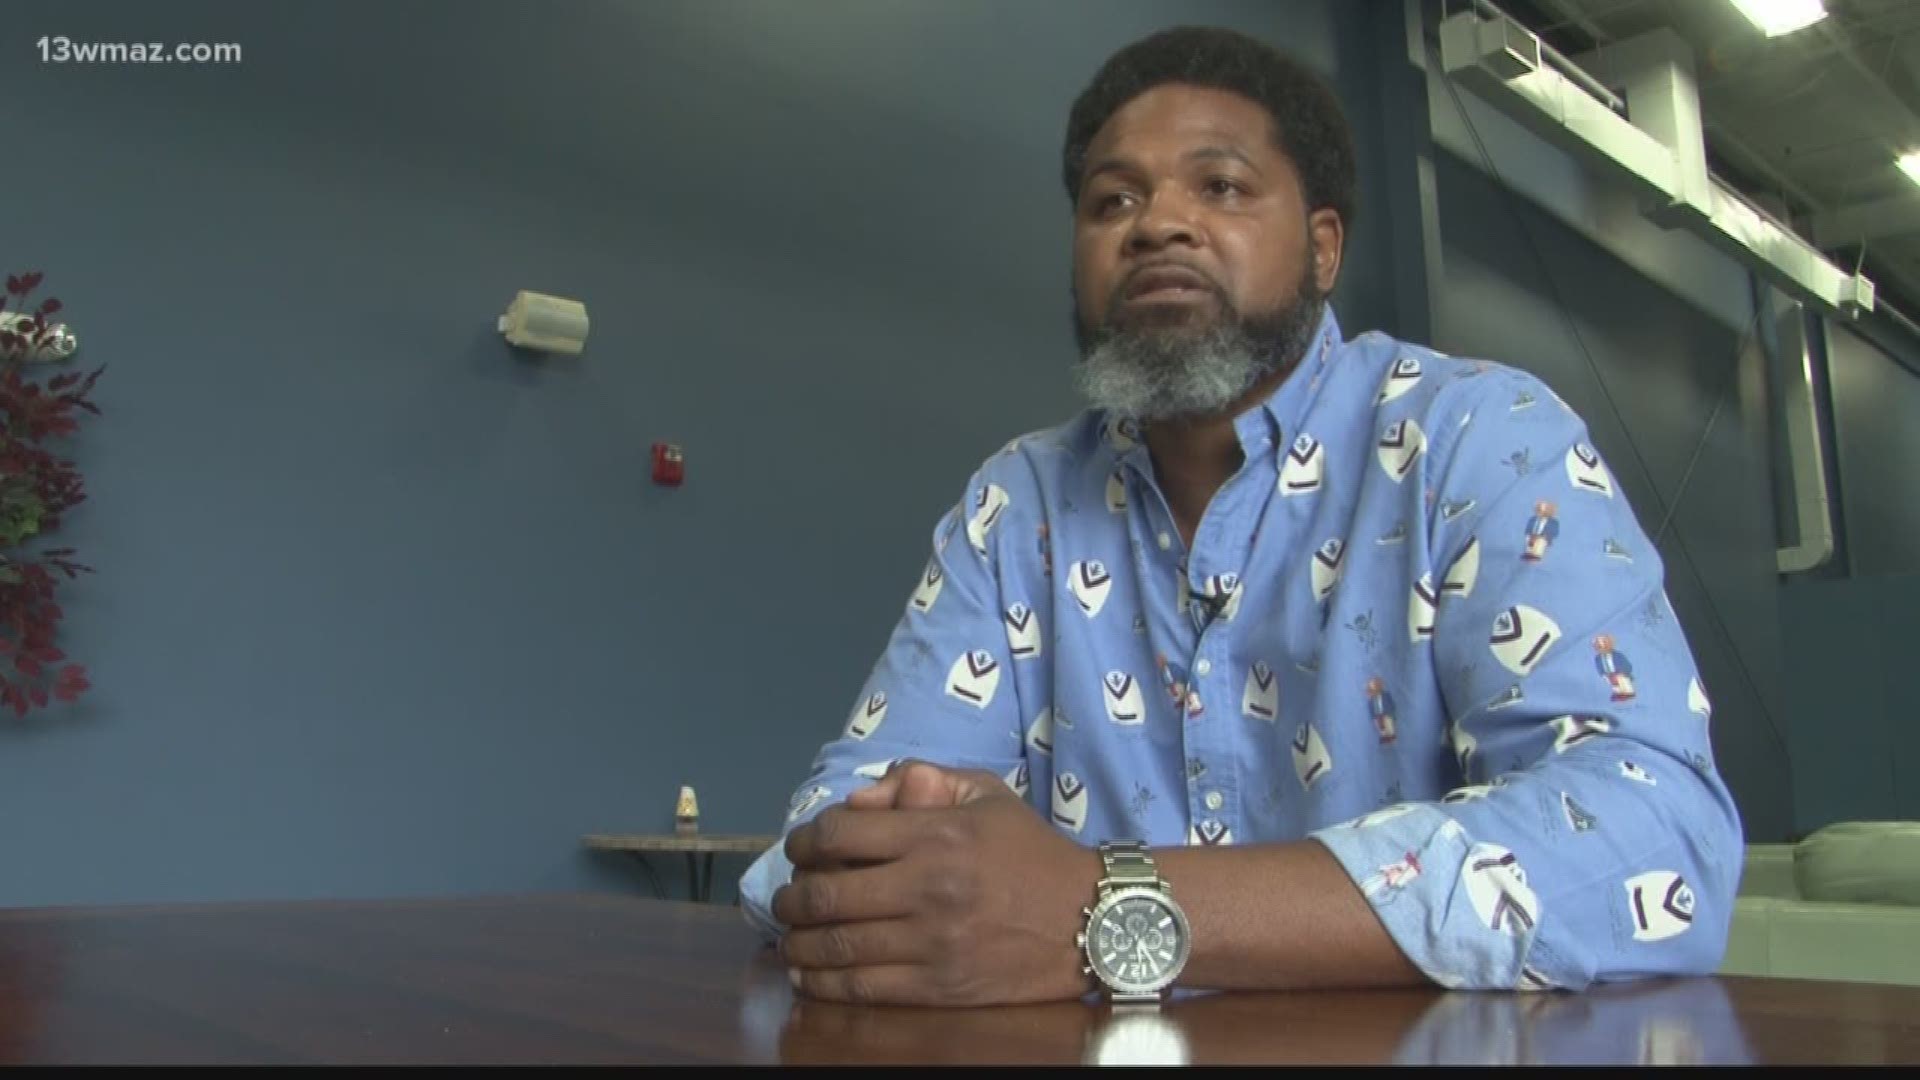 Edward Timley was convicted of felony murder and served 15 years for it. Since then he's served others in the community, and has now received a national award for it.